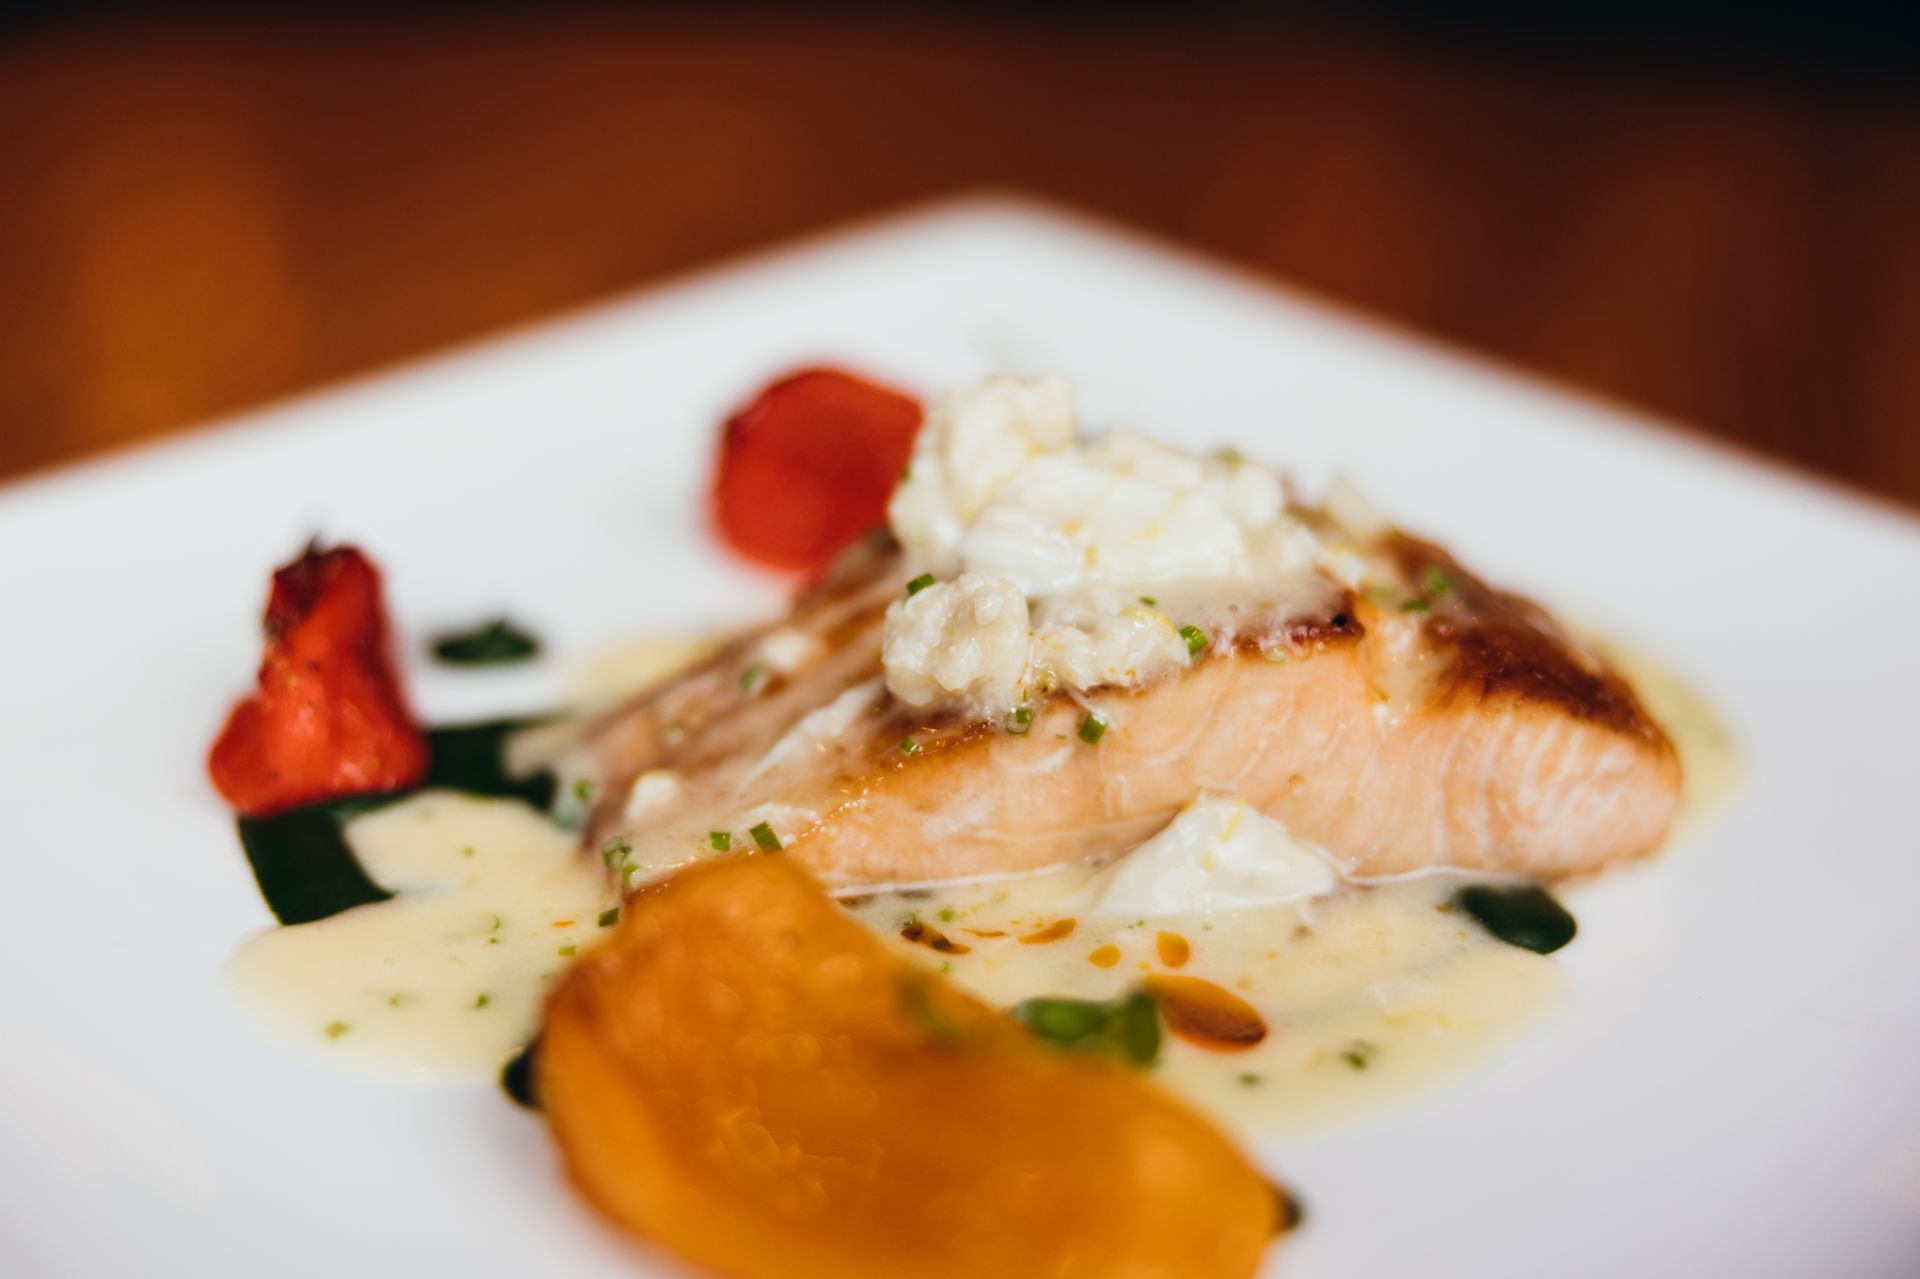 A Plate of Salmon From Glenn's Cafe, Photographed by Marketing Agency Lift Division.